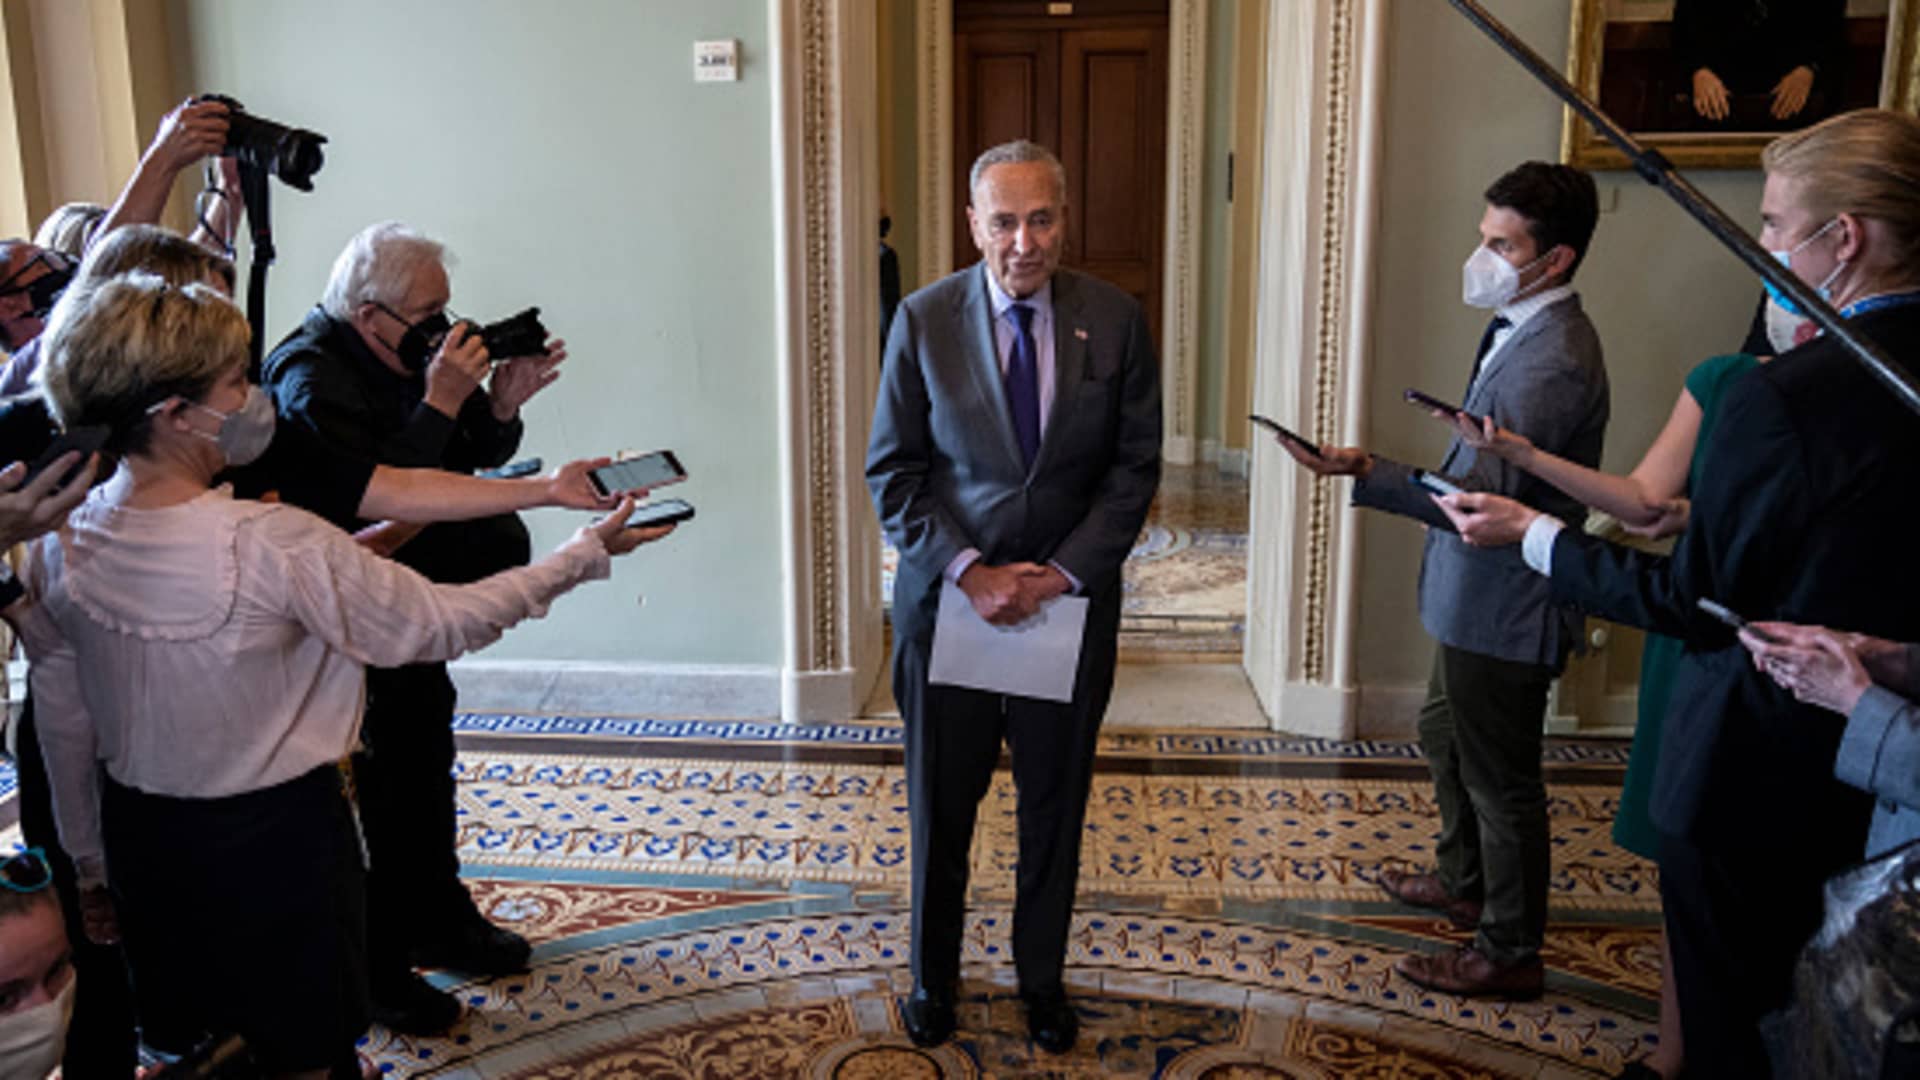 Senate Majority Leader Chuck Schumer (D-NY) speaks briefly to reporters after a meeting with Senate Democrats at the U.S. Capitol on July 28, 2021 in Washington, DC.